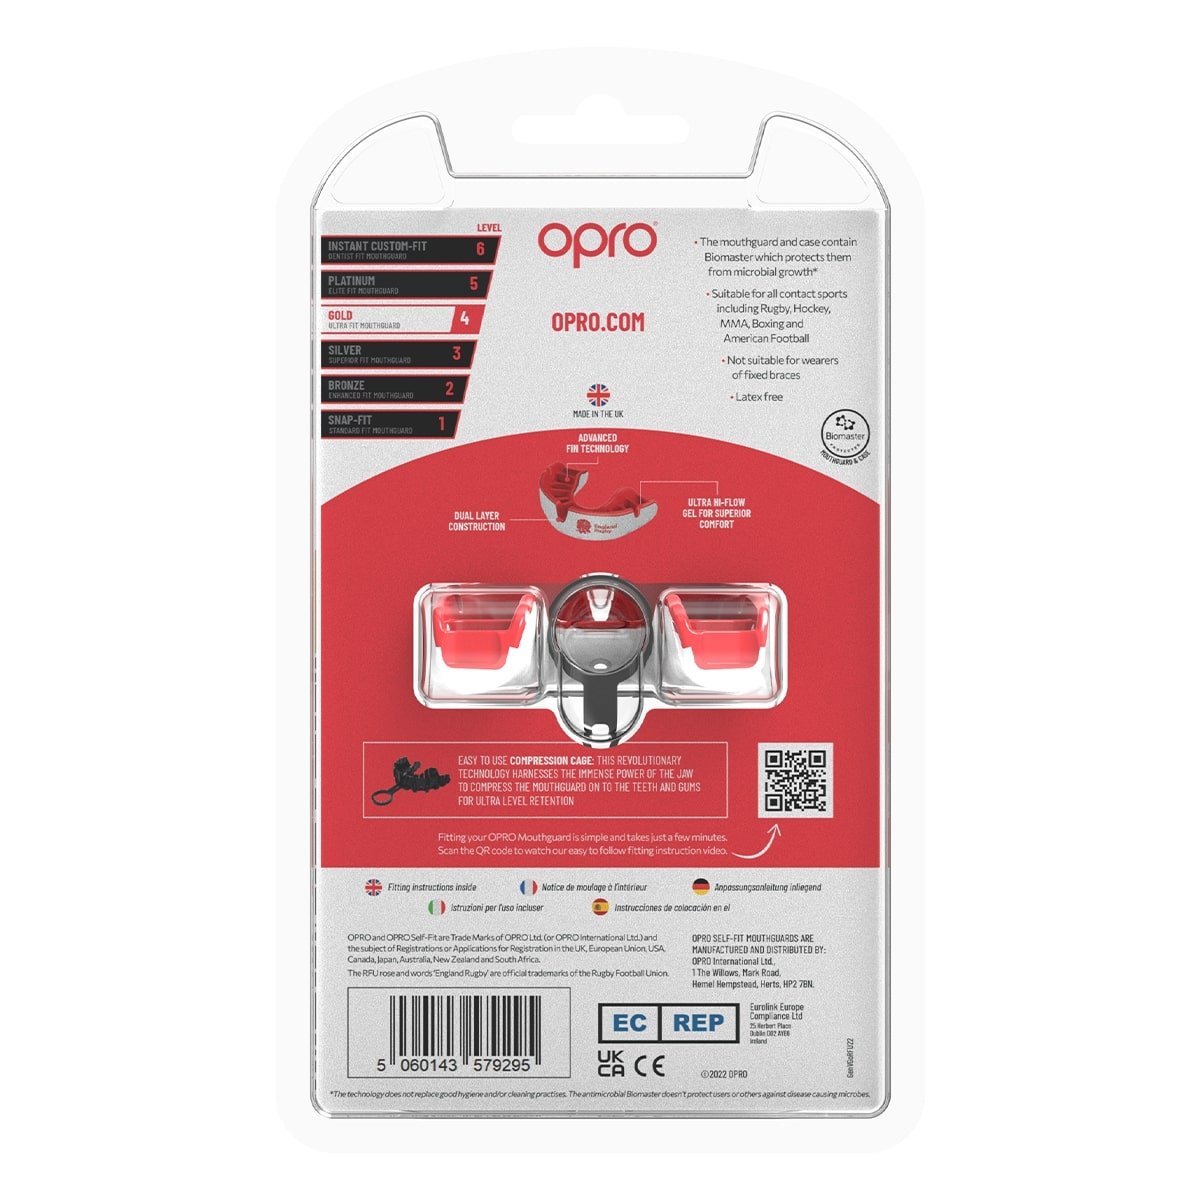 OPRO Self - Fit Adult Gold Mouthguard -England RFU |Mouthguard | Opro | Absolute Rugby